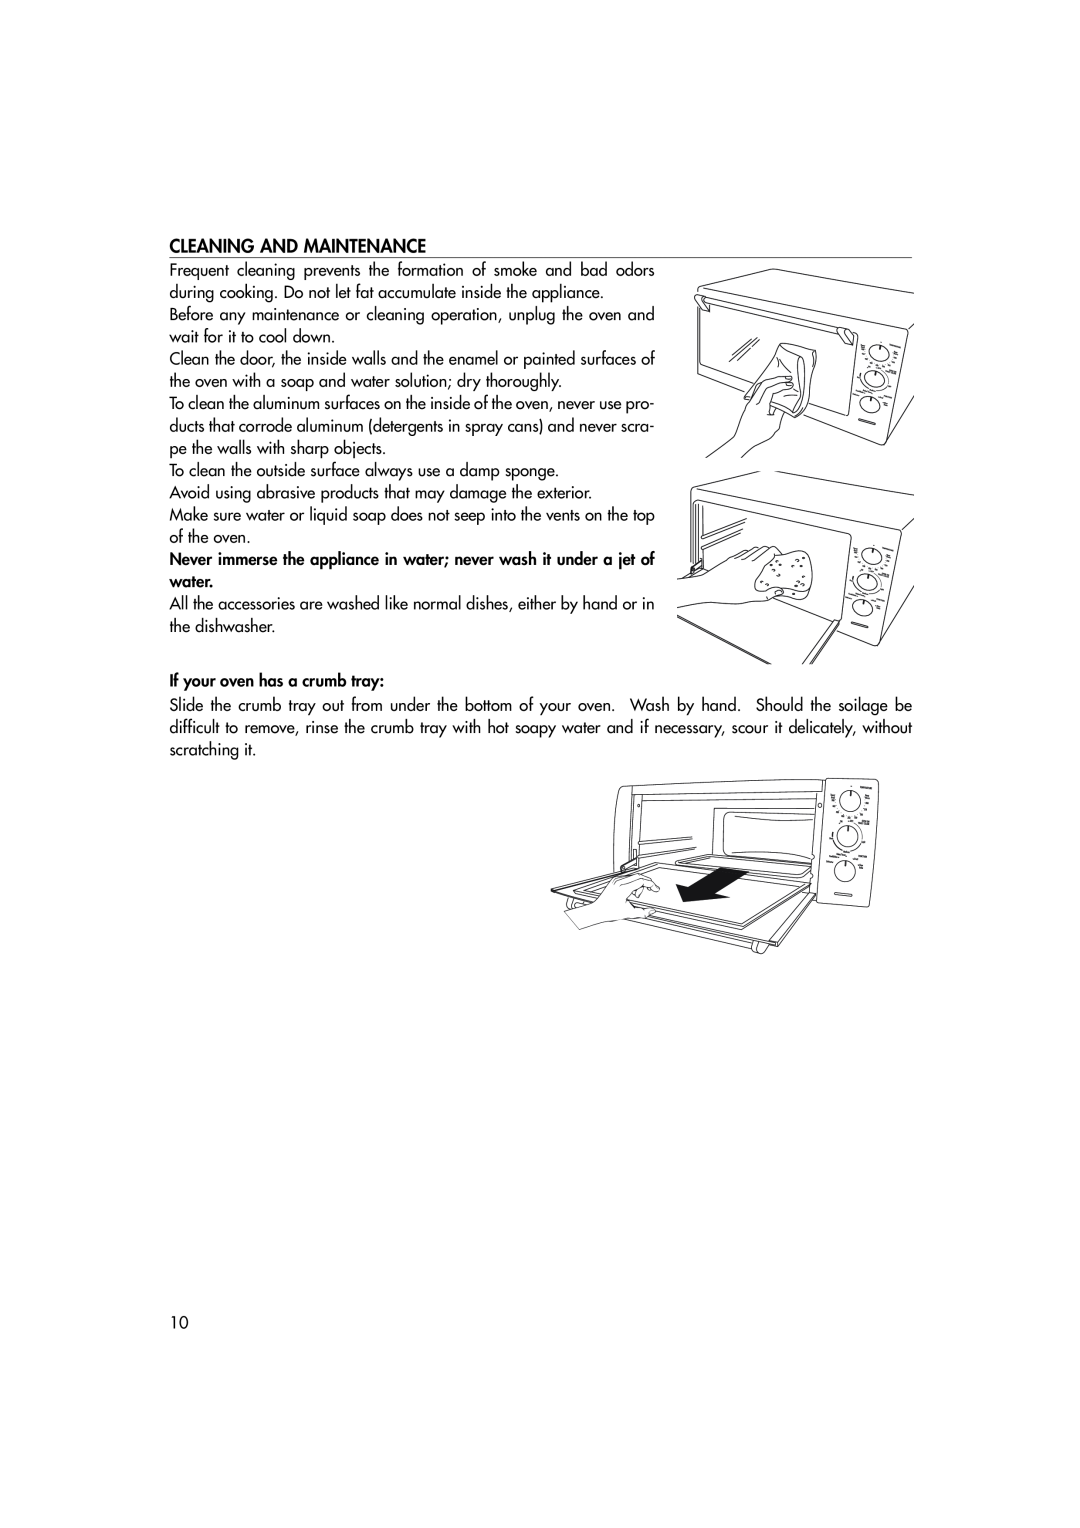 DeLonghi EO1270 B manual Cleaning And Maintenance 